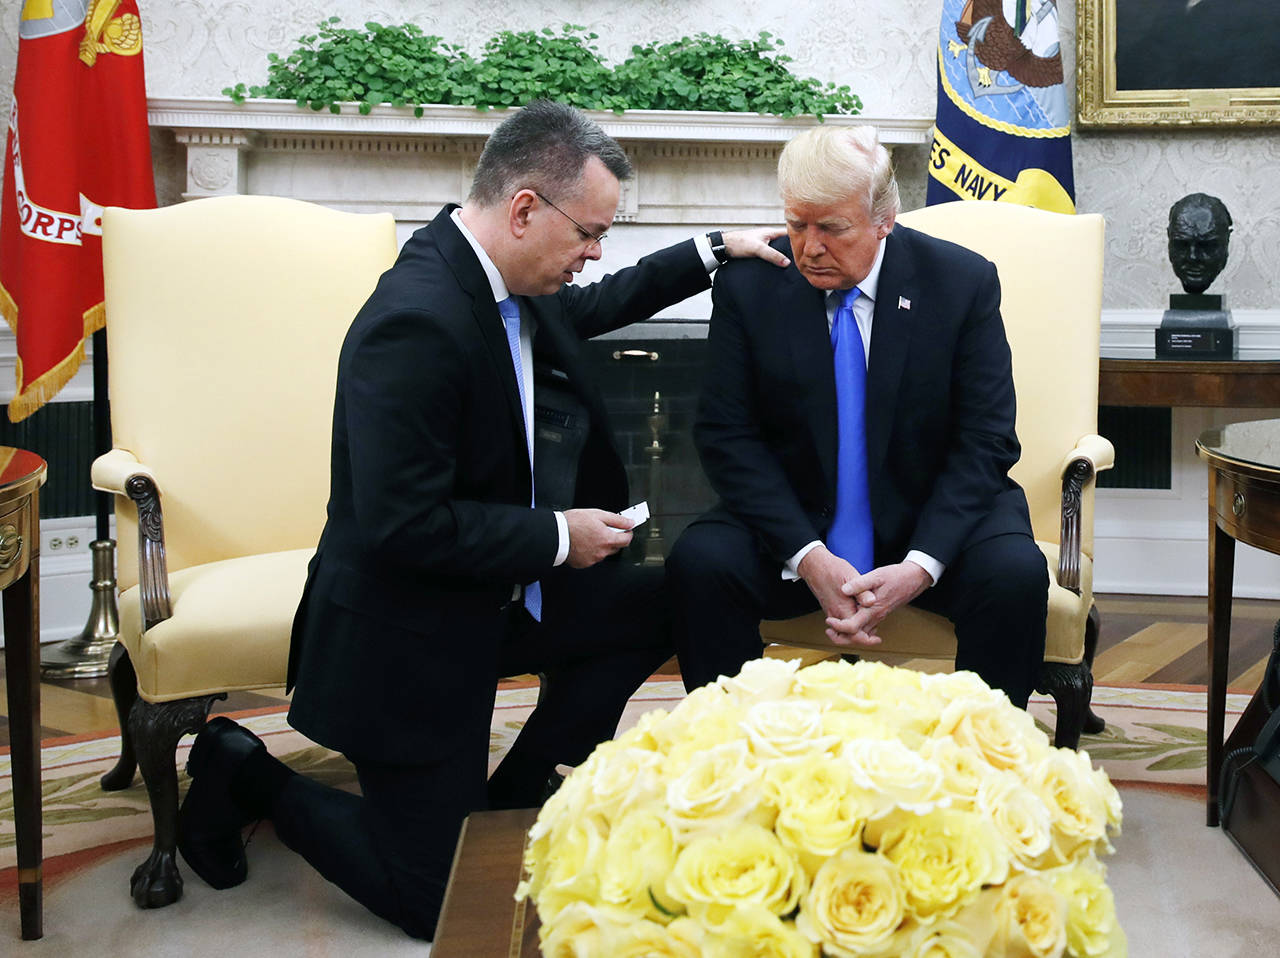 President Donald Trump prays with American pastor Andrew Brunson in the Oval Office of the White House on Saturday on Washington. Brunson returned to the U.S. around midday after he was freed Friday, from nearly two years of detention in Turkey. (AP Photo/Jacquelyn Martin)